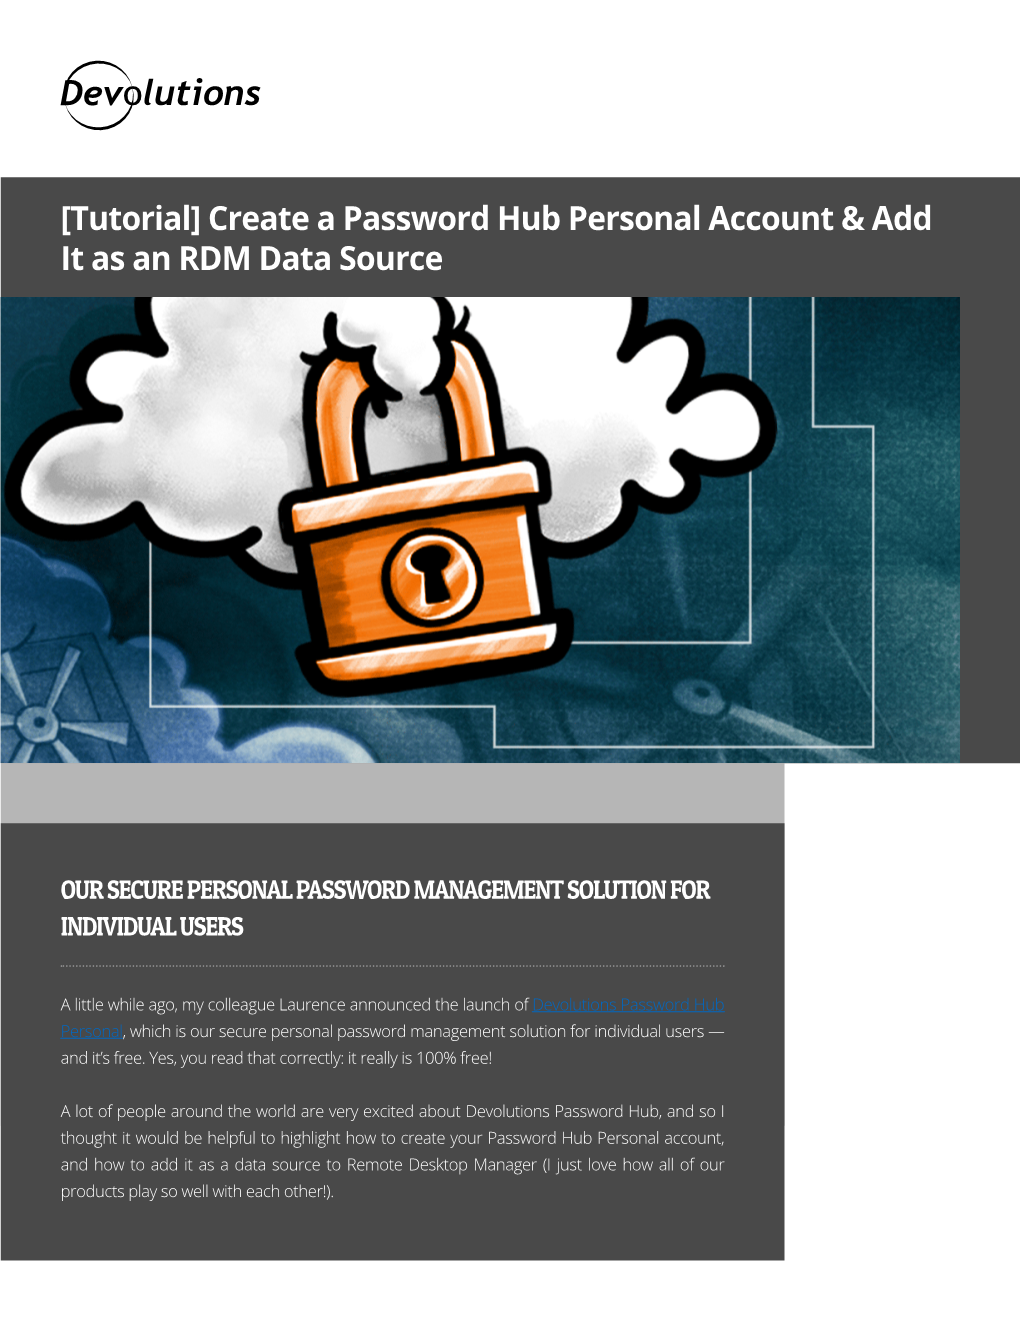 [Tutorial] Create a Password Hub Personal Account & Add It As An